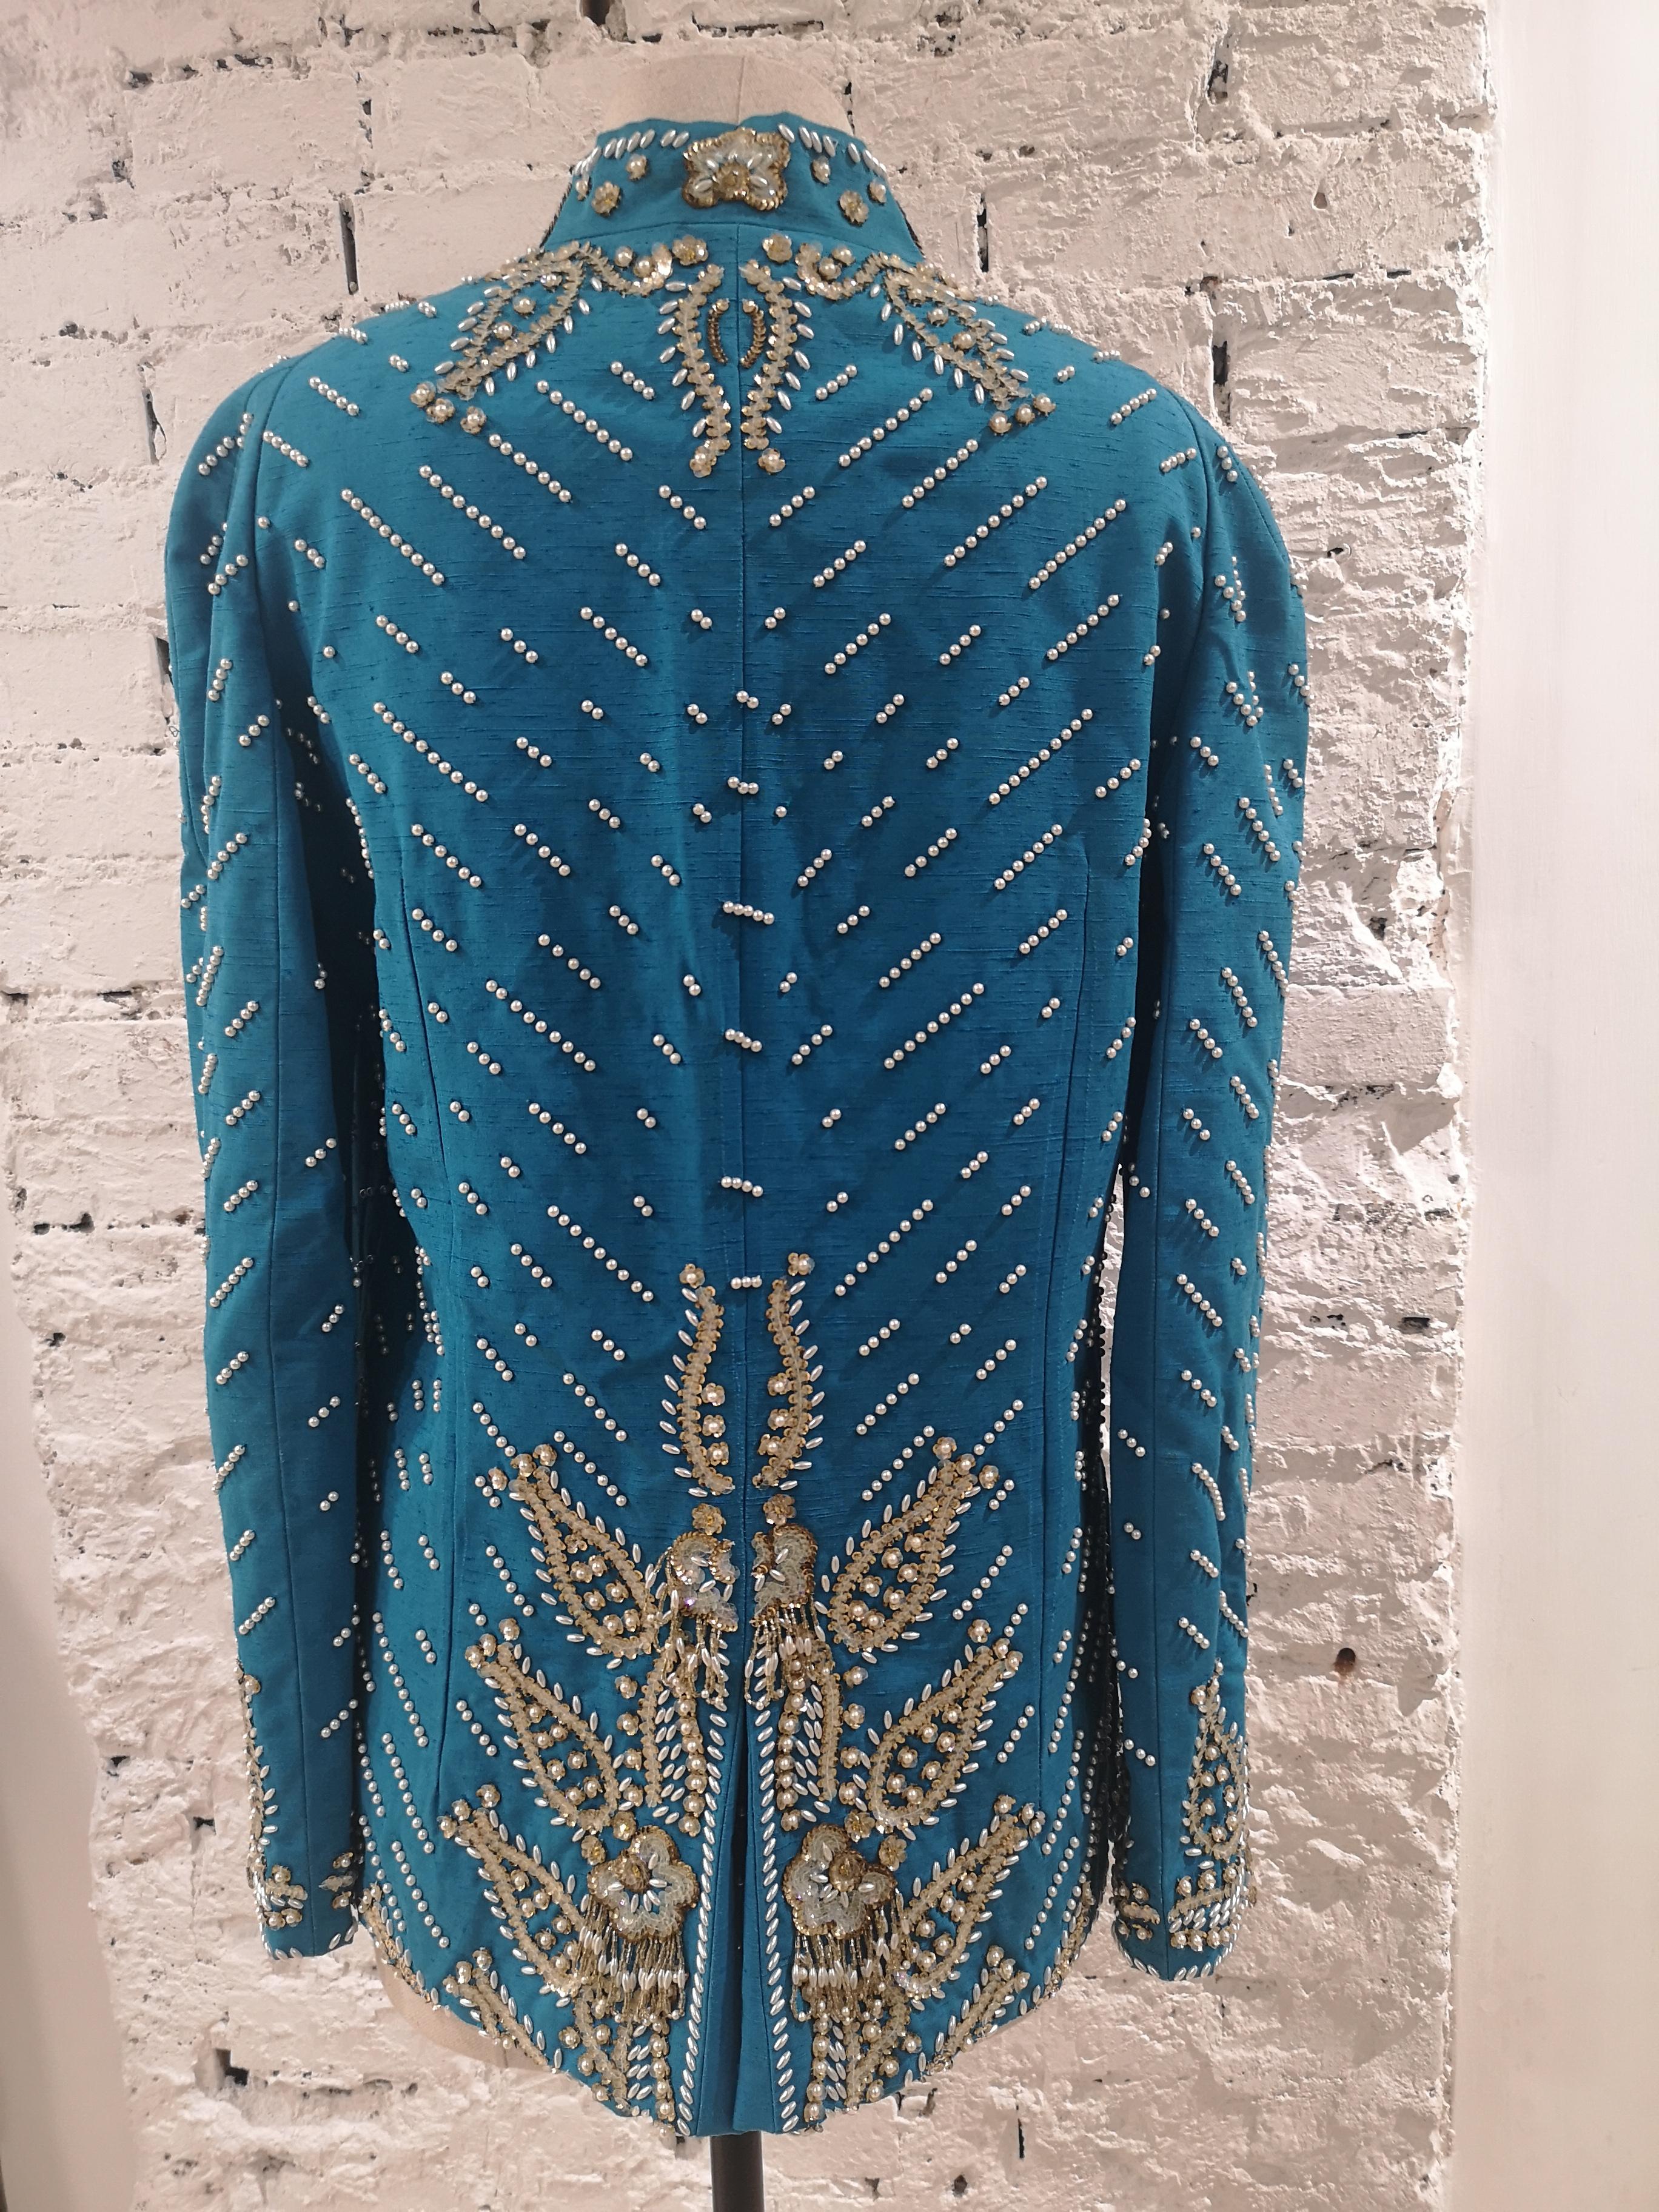 Christian Dior turquoise pearls beads sequins jacket 5